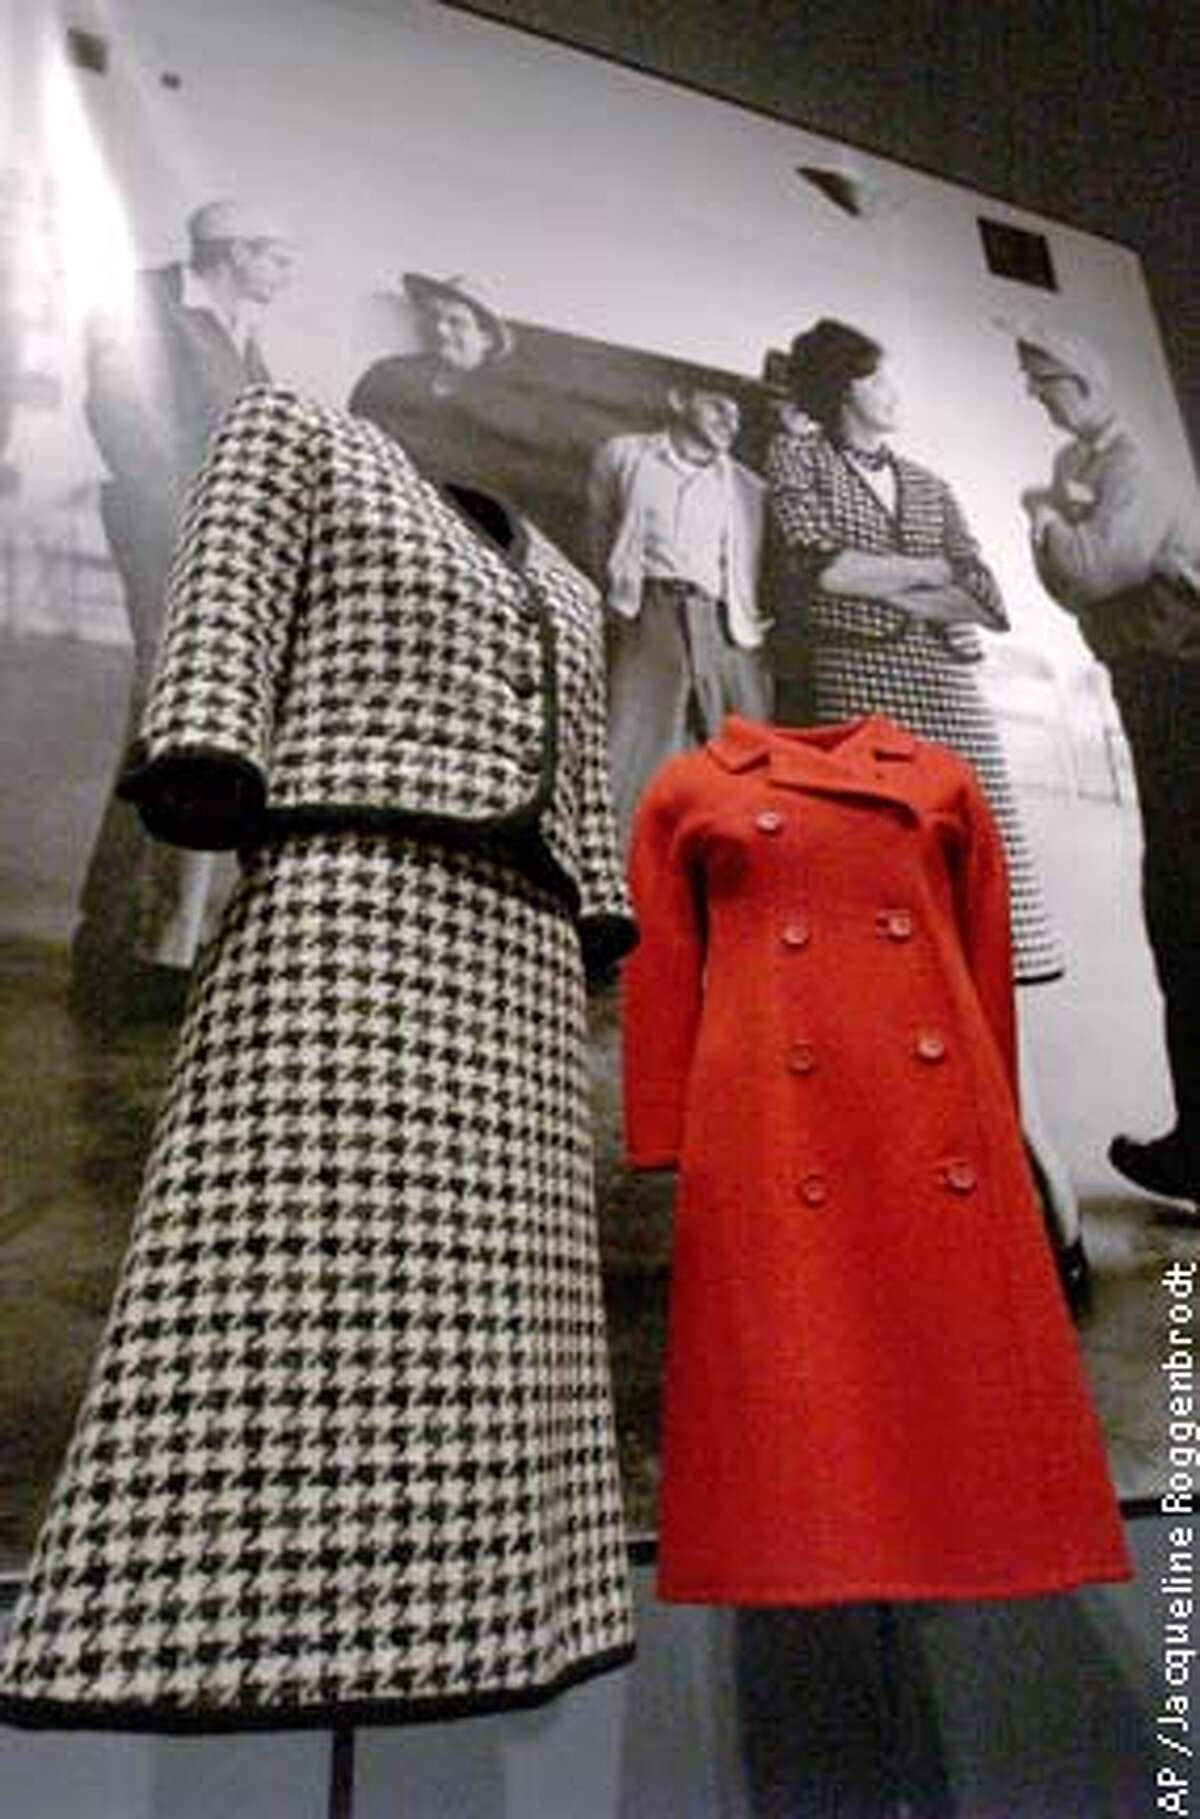 Two of Kennedy's fashion treasures: a black and white houndstooth suit with braided trim by Bob Bugnand, left, and a coat in scarlet double-faced wool by Hubert de Givenchy. Associated Press photo by Jacqueline Roggenbrodt